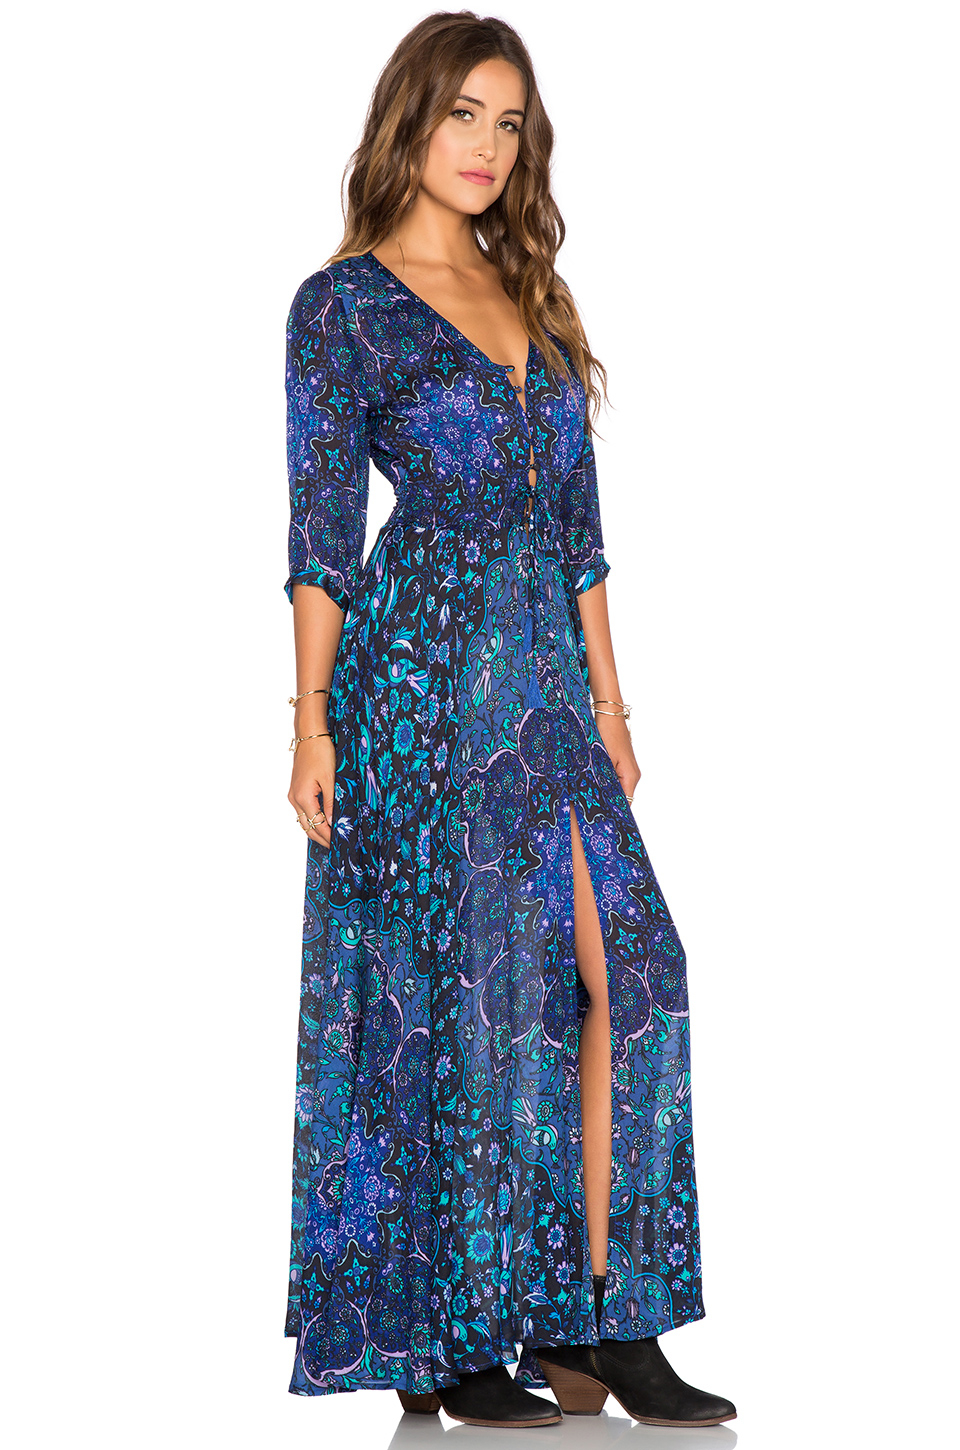 Lyst - Spell & the gypsy collective Kiss The Sky Gown in Blue